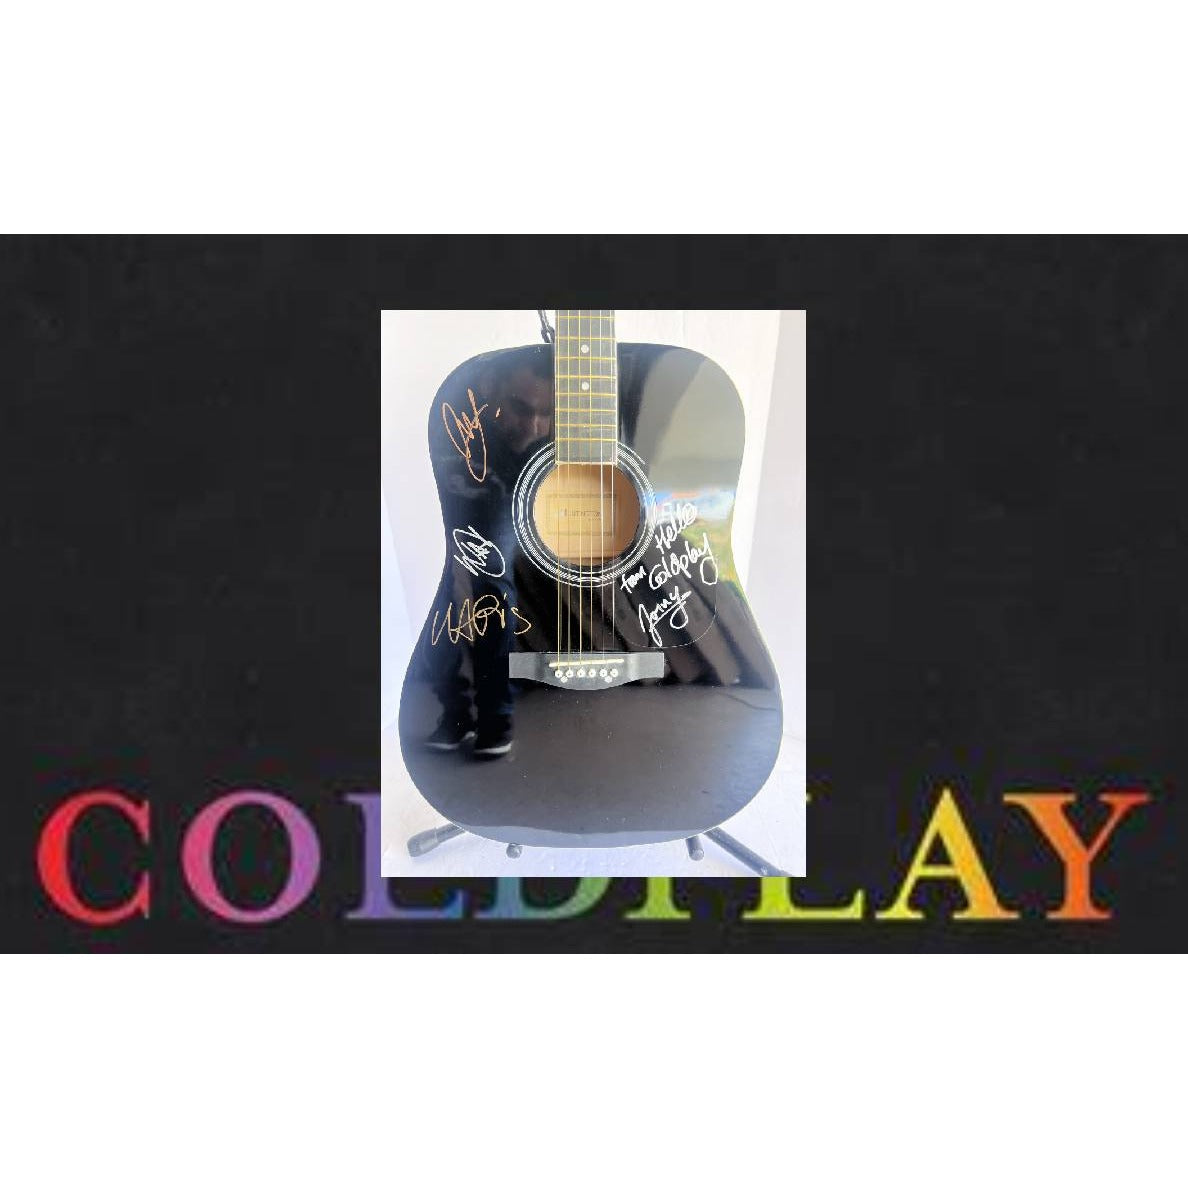 Chris Martin Coldplay full size acoustic guitar signed with proof